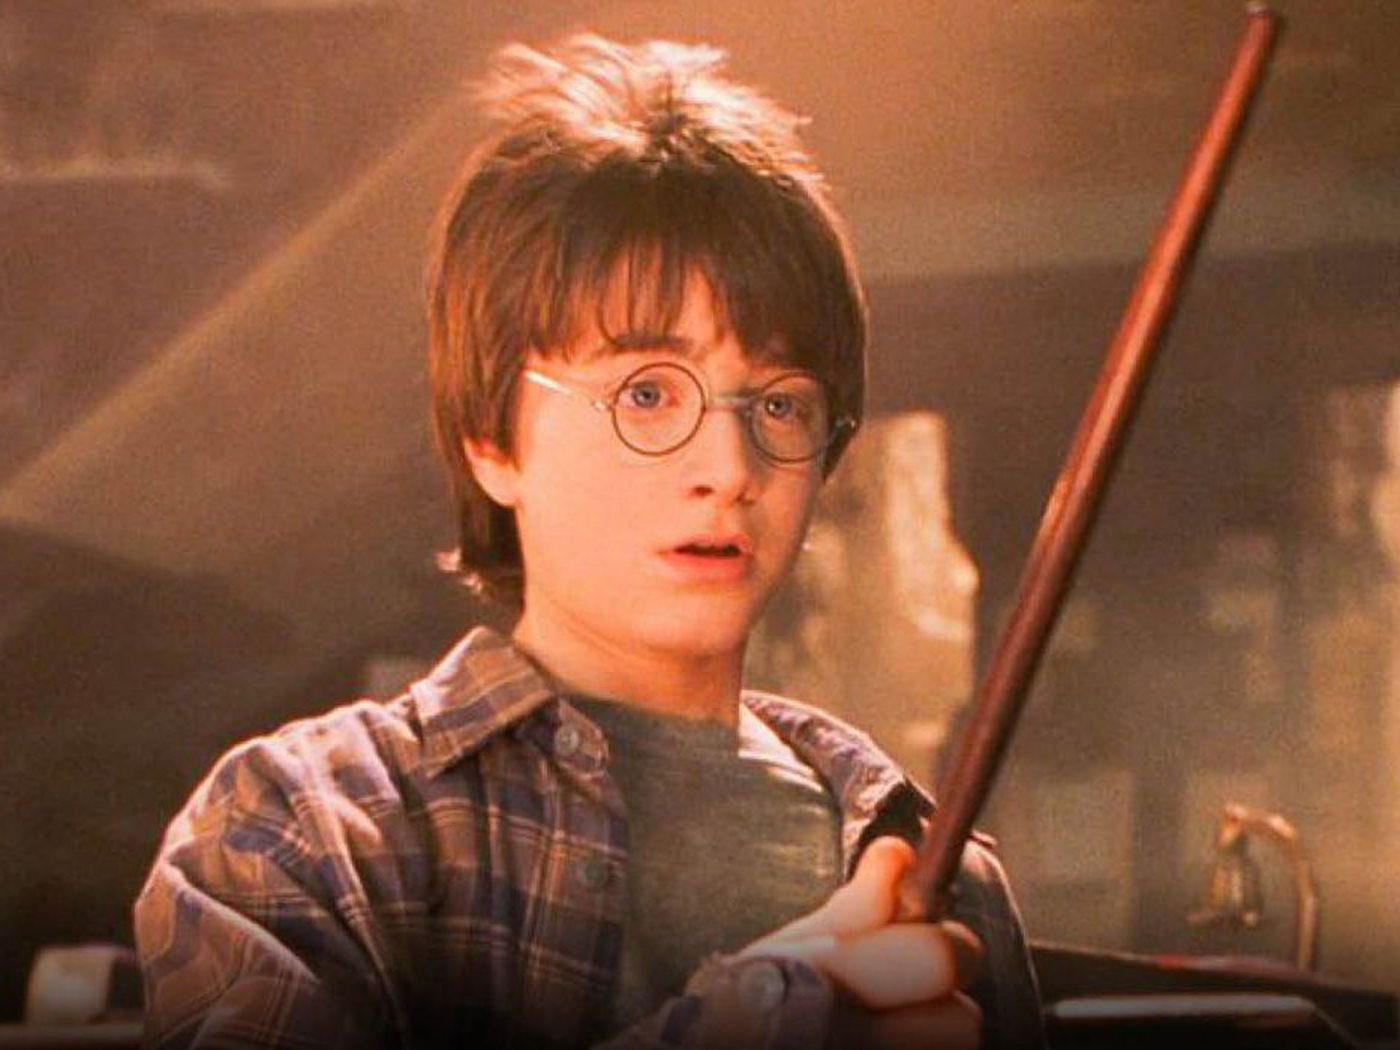 Happy 33rd birthday to the talented Daniel Radcliffe. 